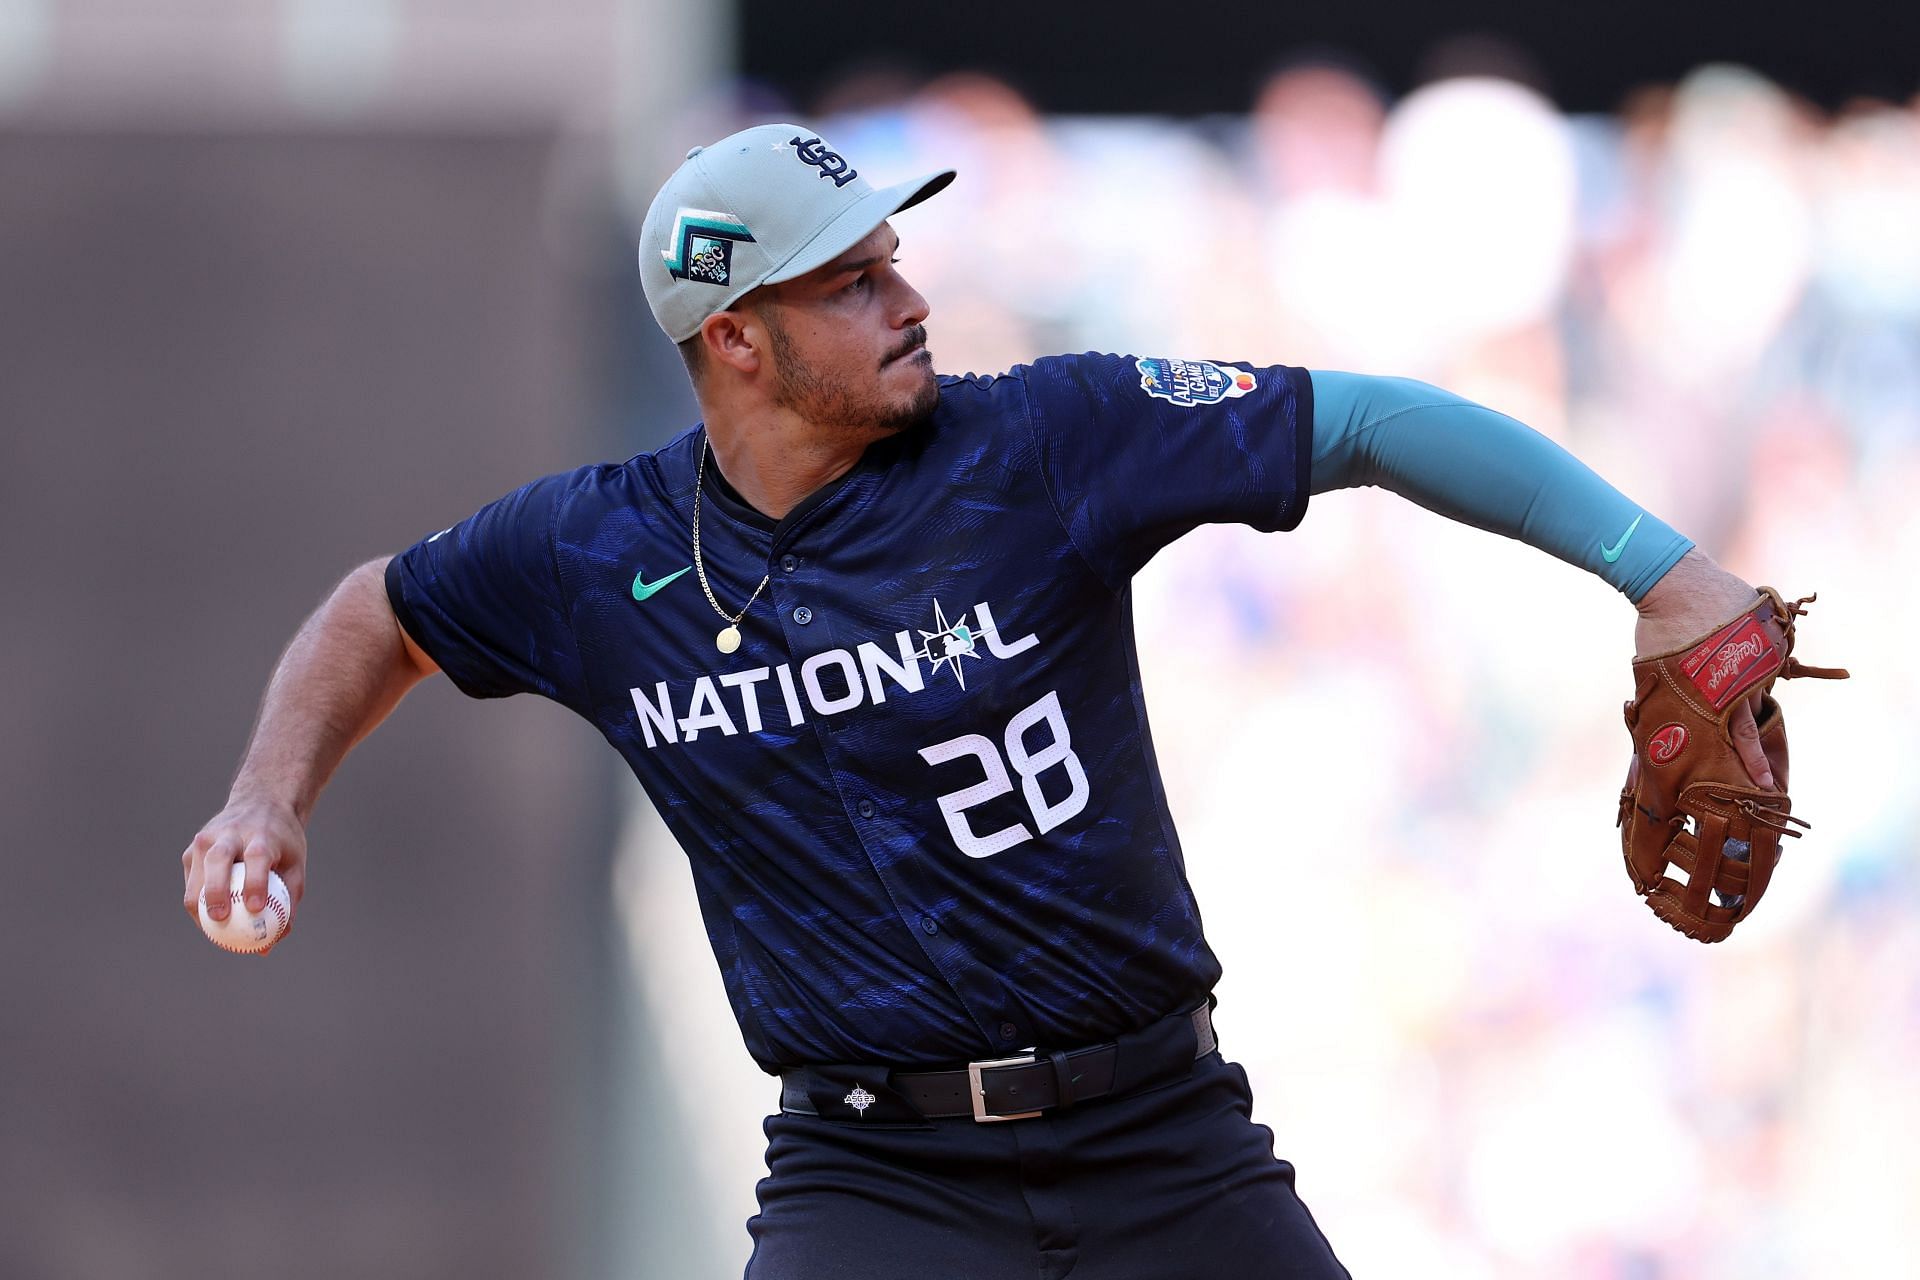 Hummel: What are the chances Nolan Arenado opts out after the 2022